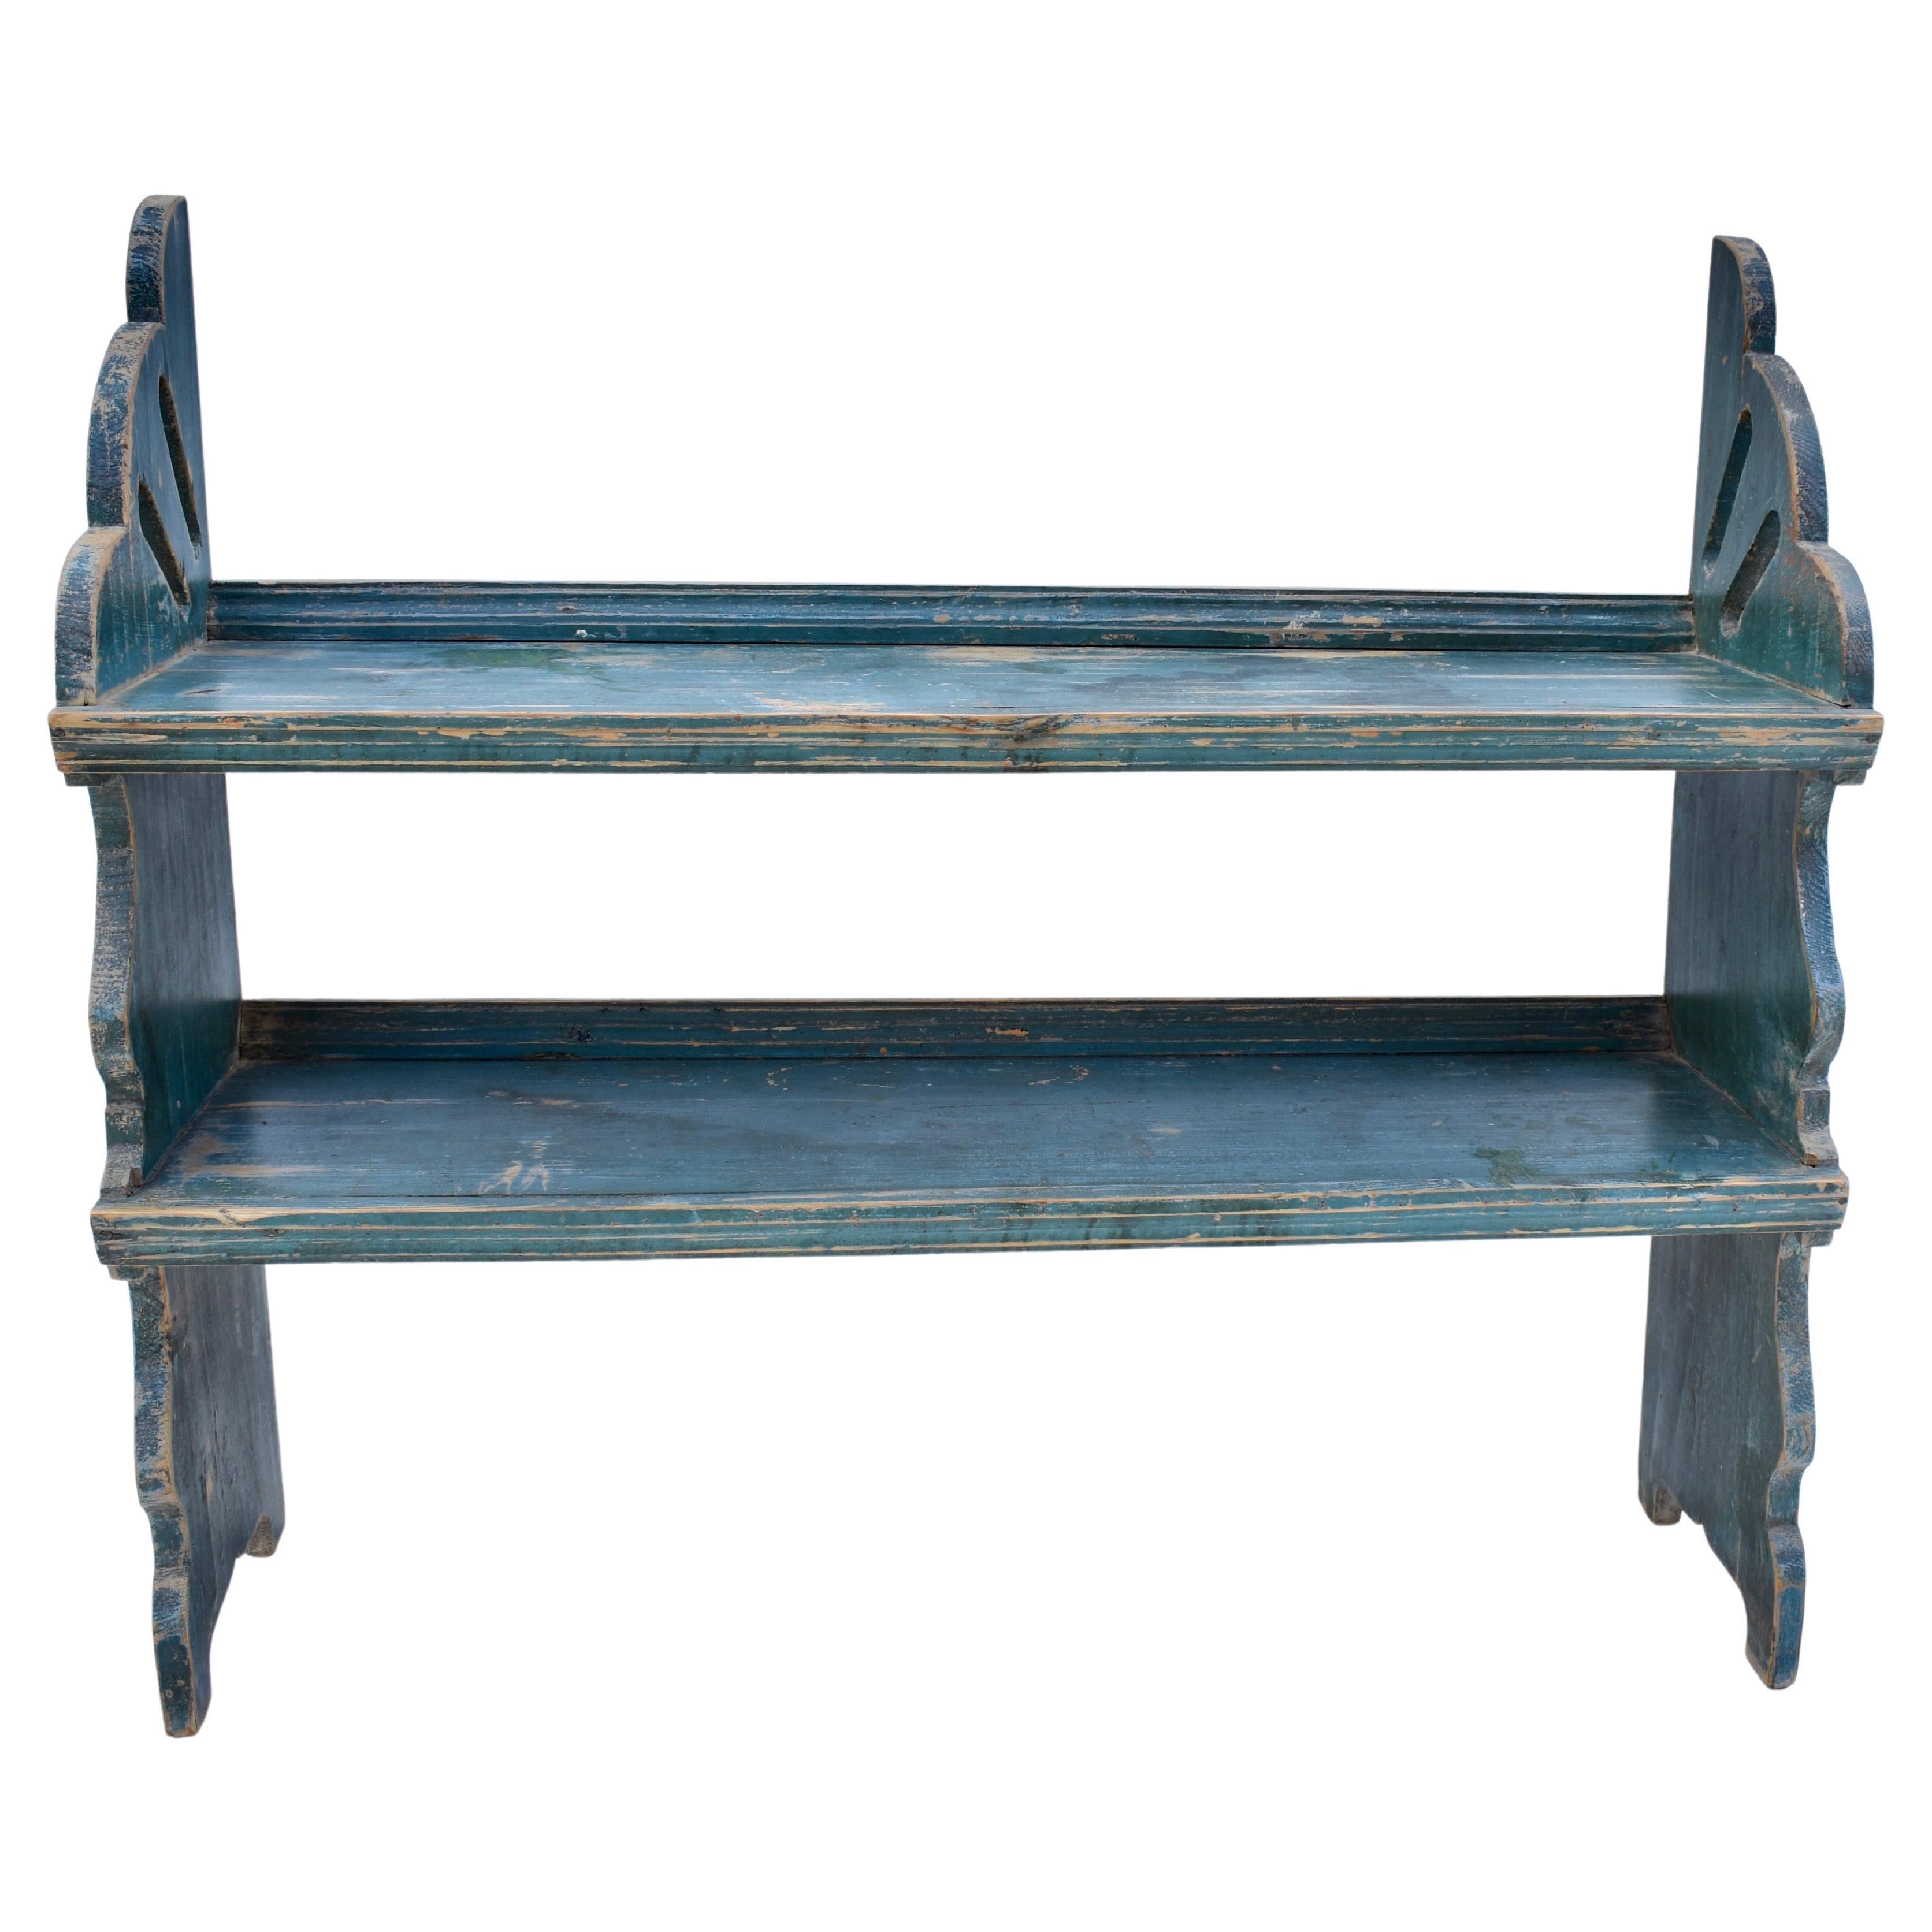 Painted Pine Water Bench